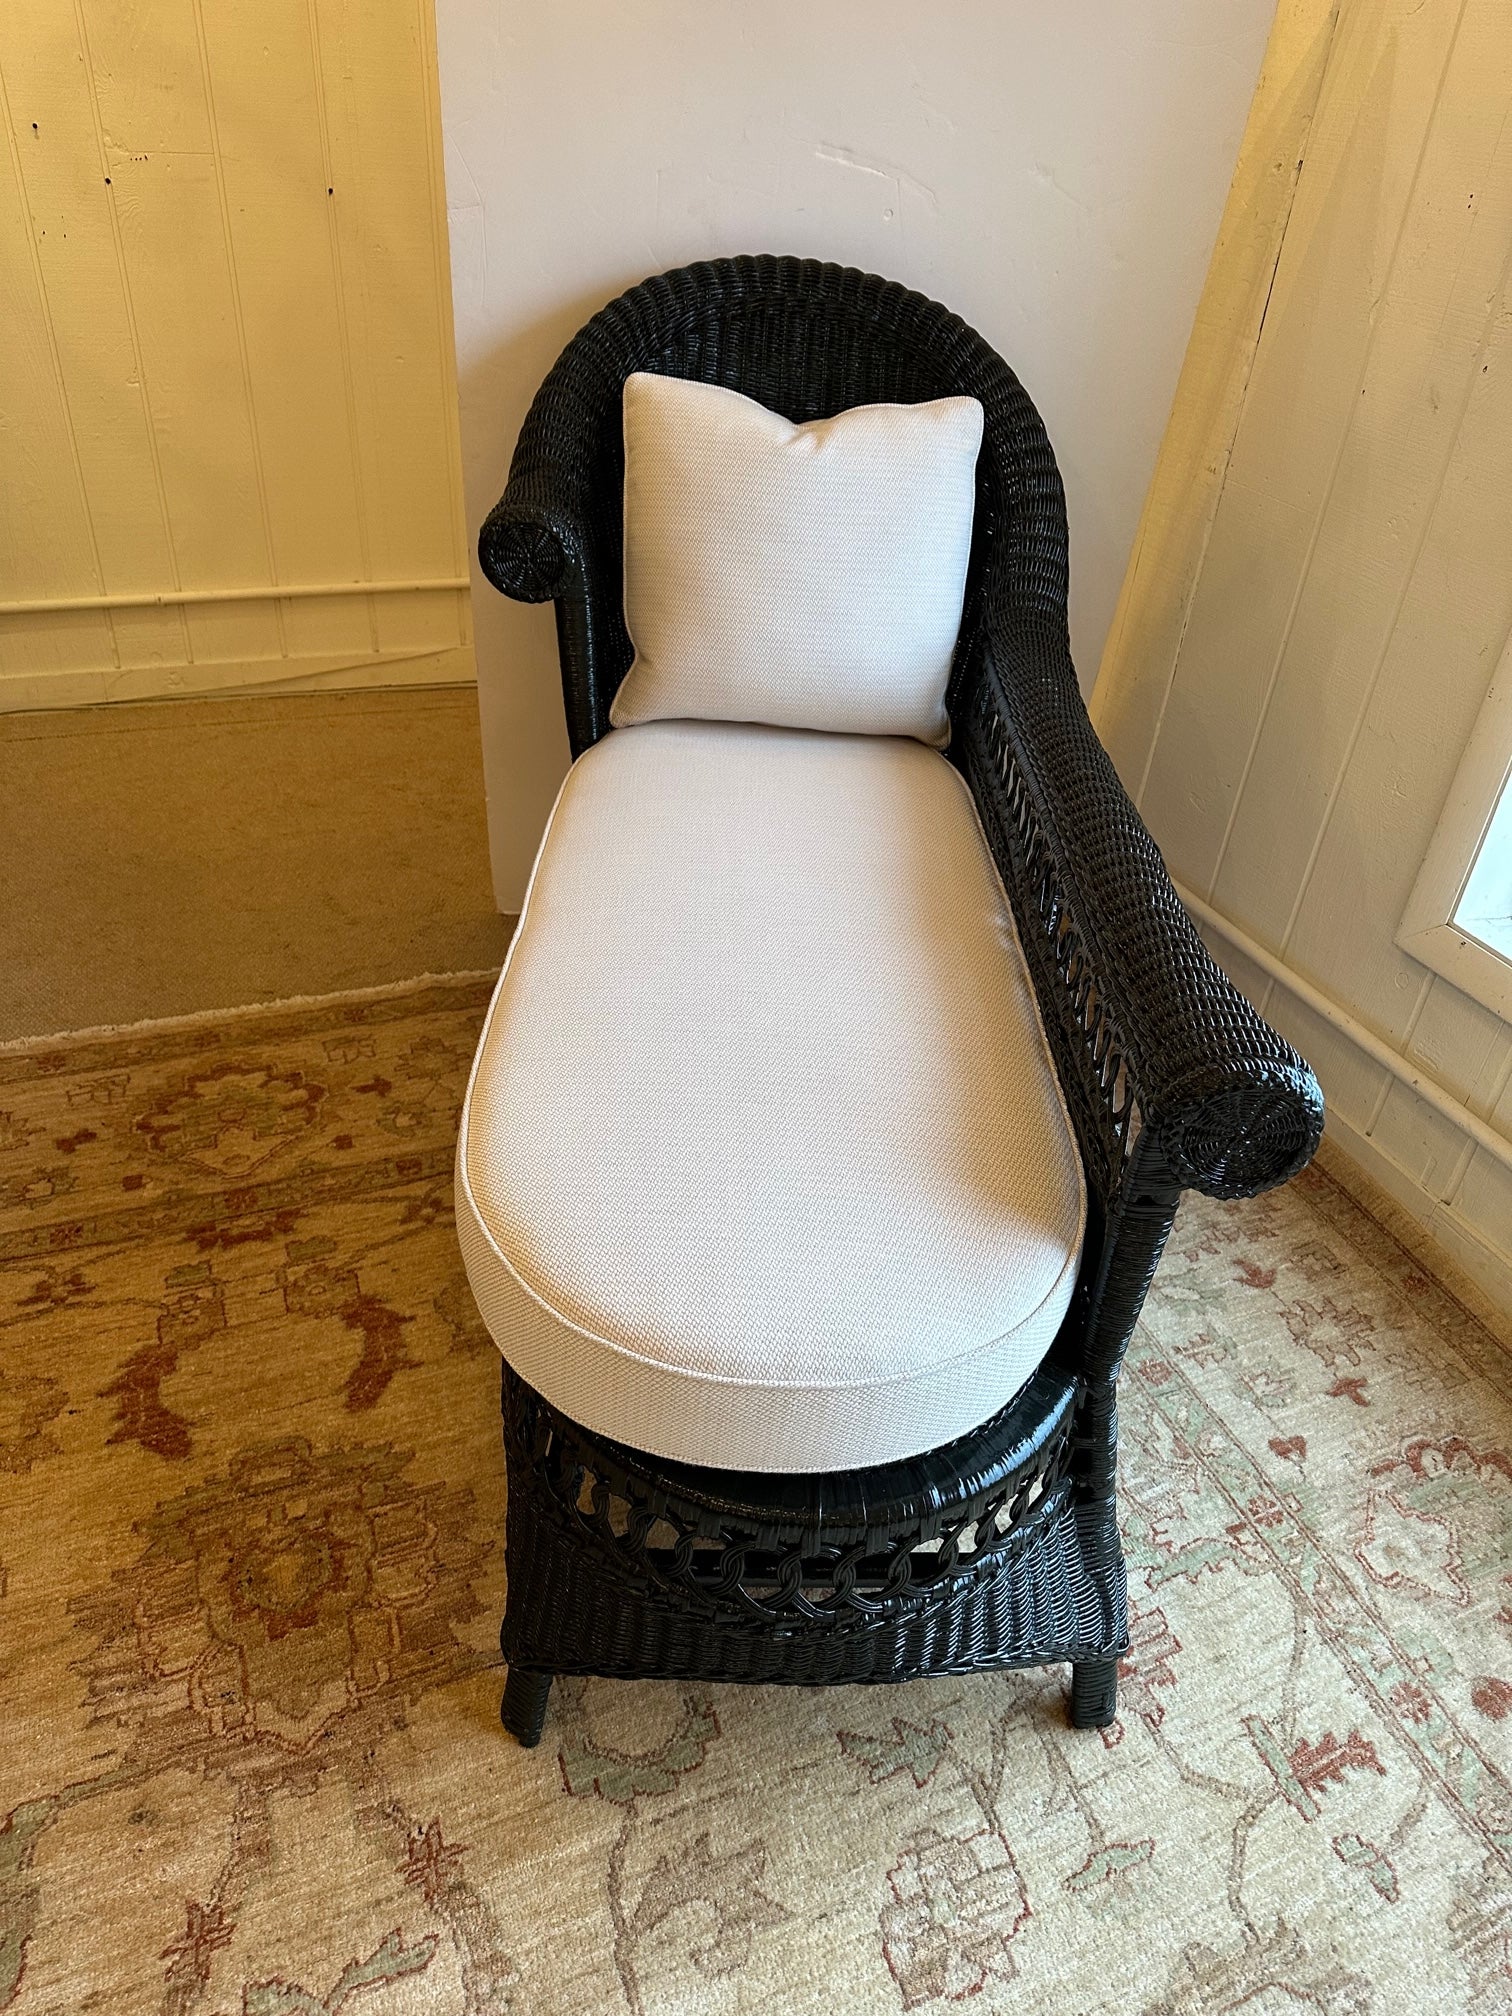 Superb antique wicker chaise in fabulous updated condition painted a very dark green almost black, with new upholstered custom seat cushion and pillow.
Seat h 21 Seat d 21
Arm height 27.5